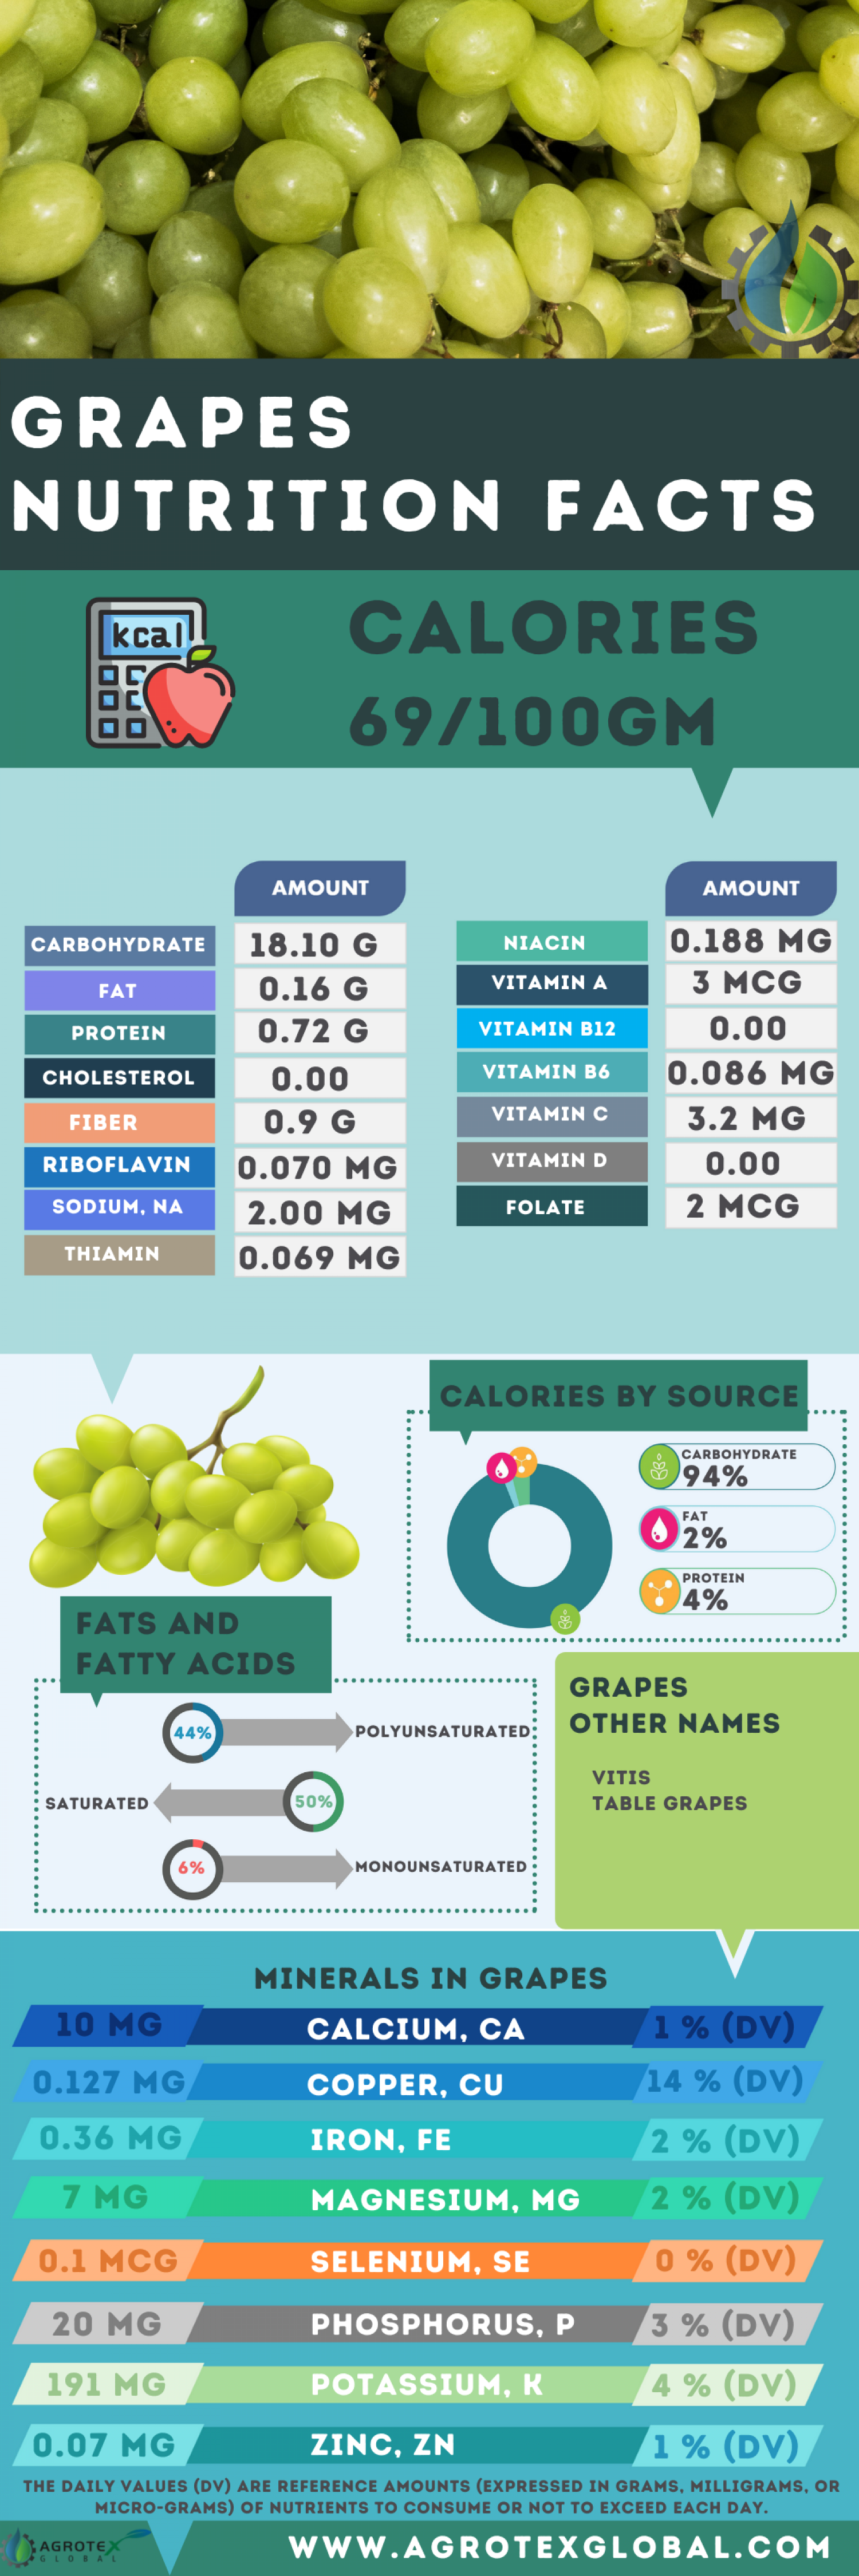 Green Grapes nutrition facts Infographic